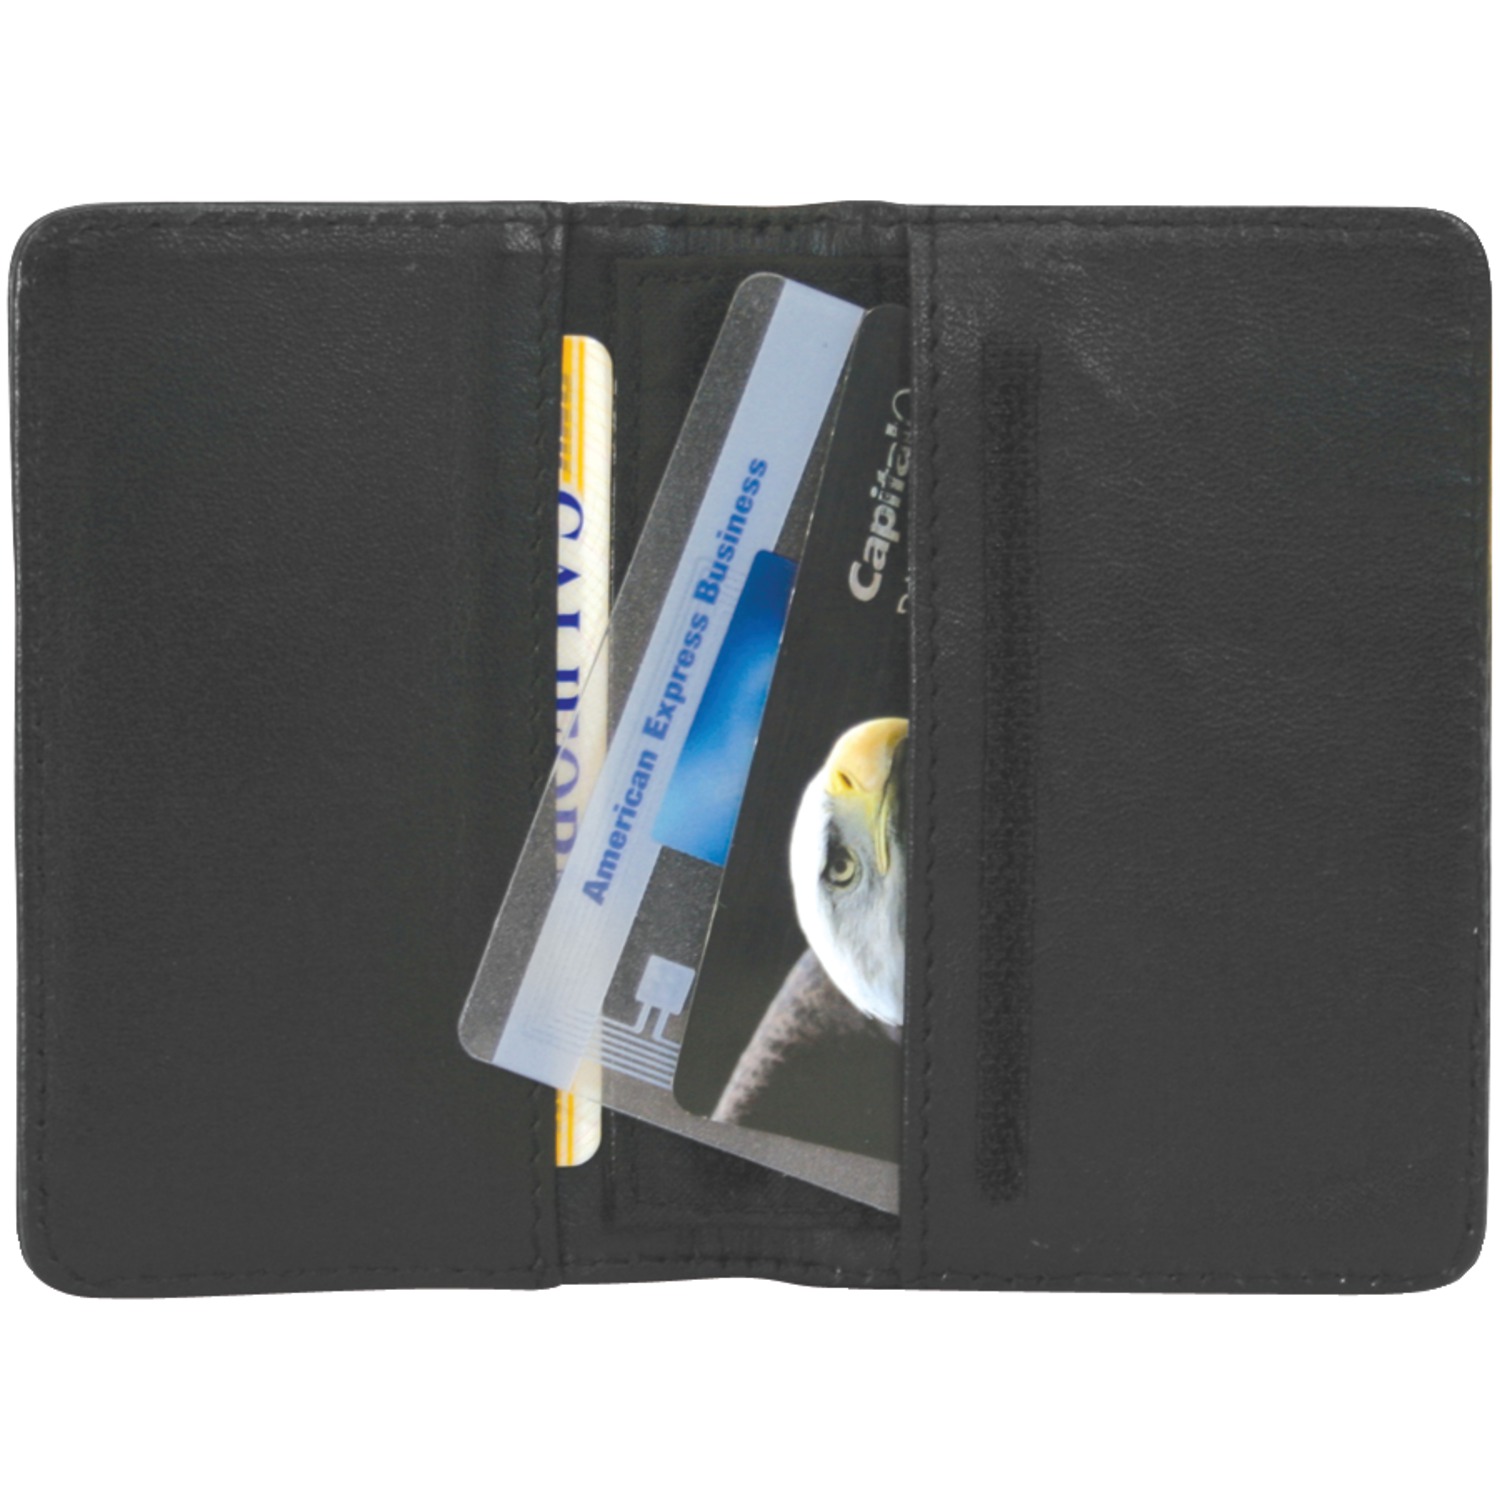 Mblmewsscw Mewss-Cw Id Sentry Credit Card Wallet - image 2 of 2